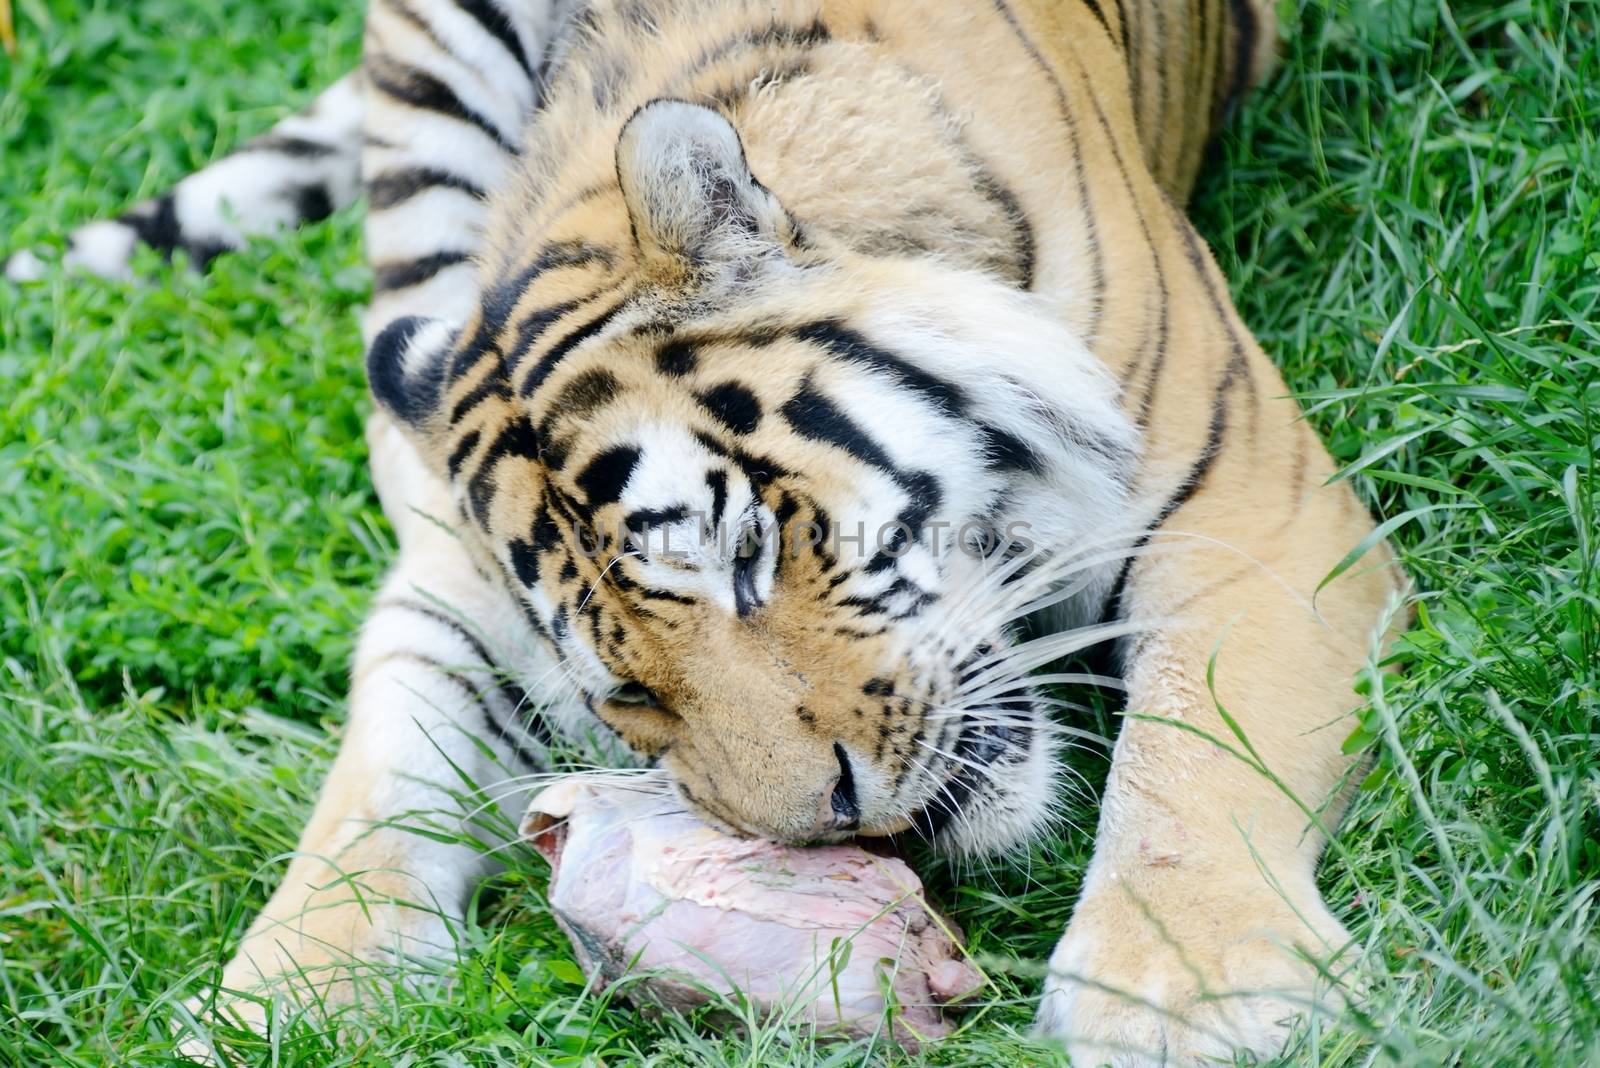 Tiger feeding by kmwphotography